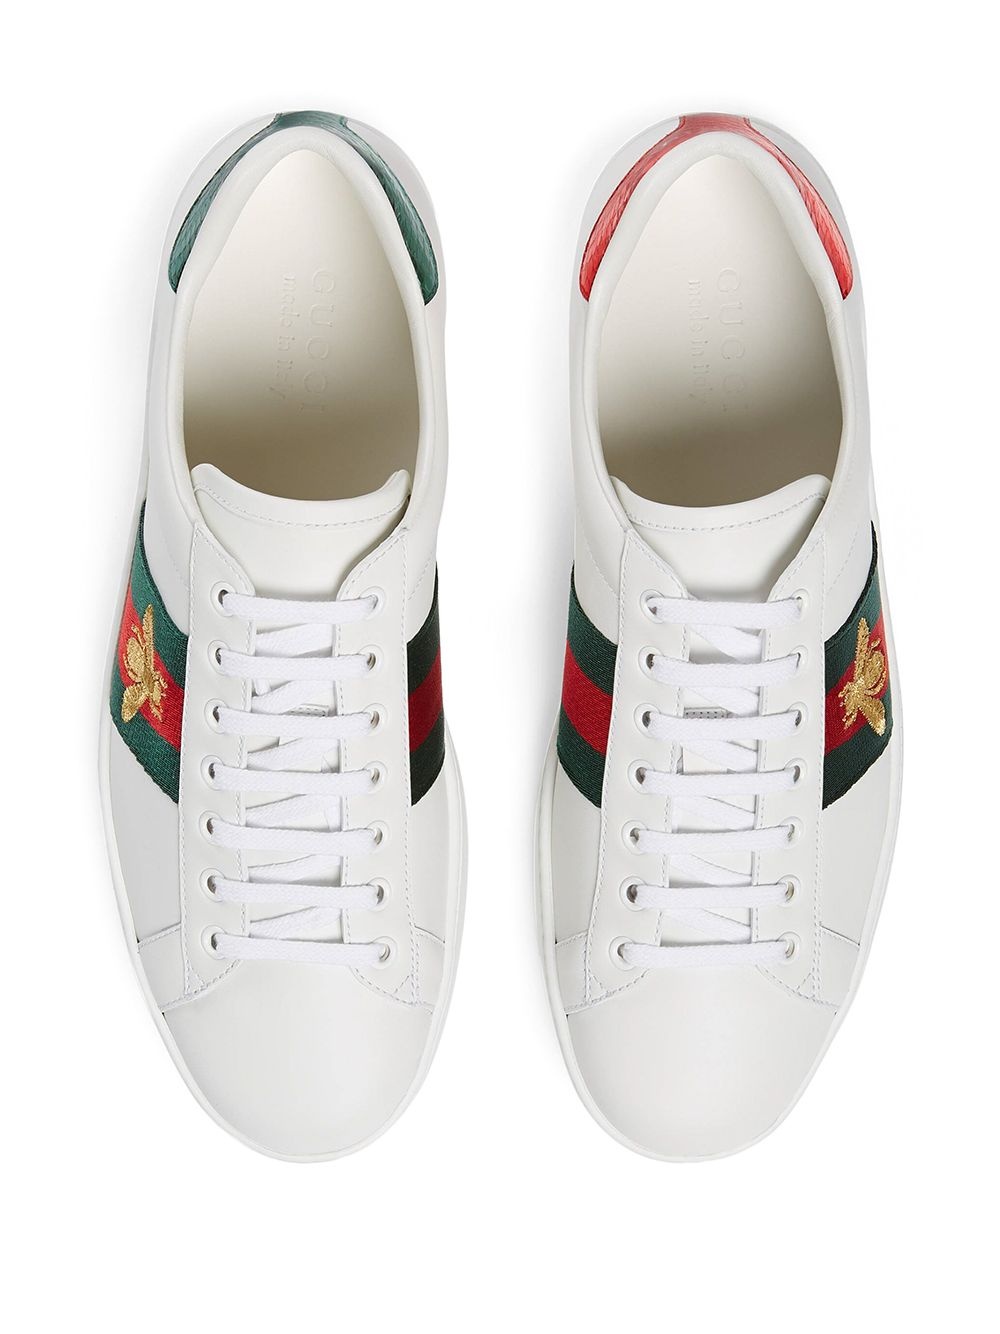 Ace leather sneakers - 4